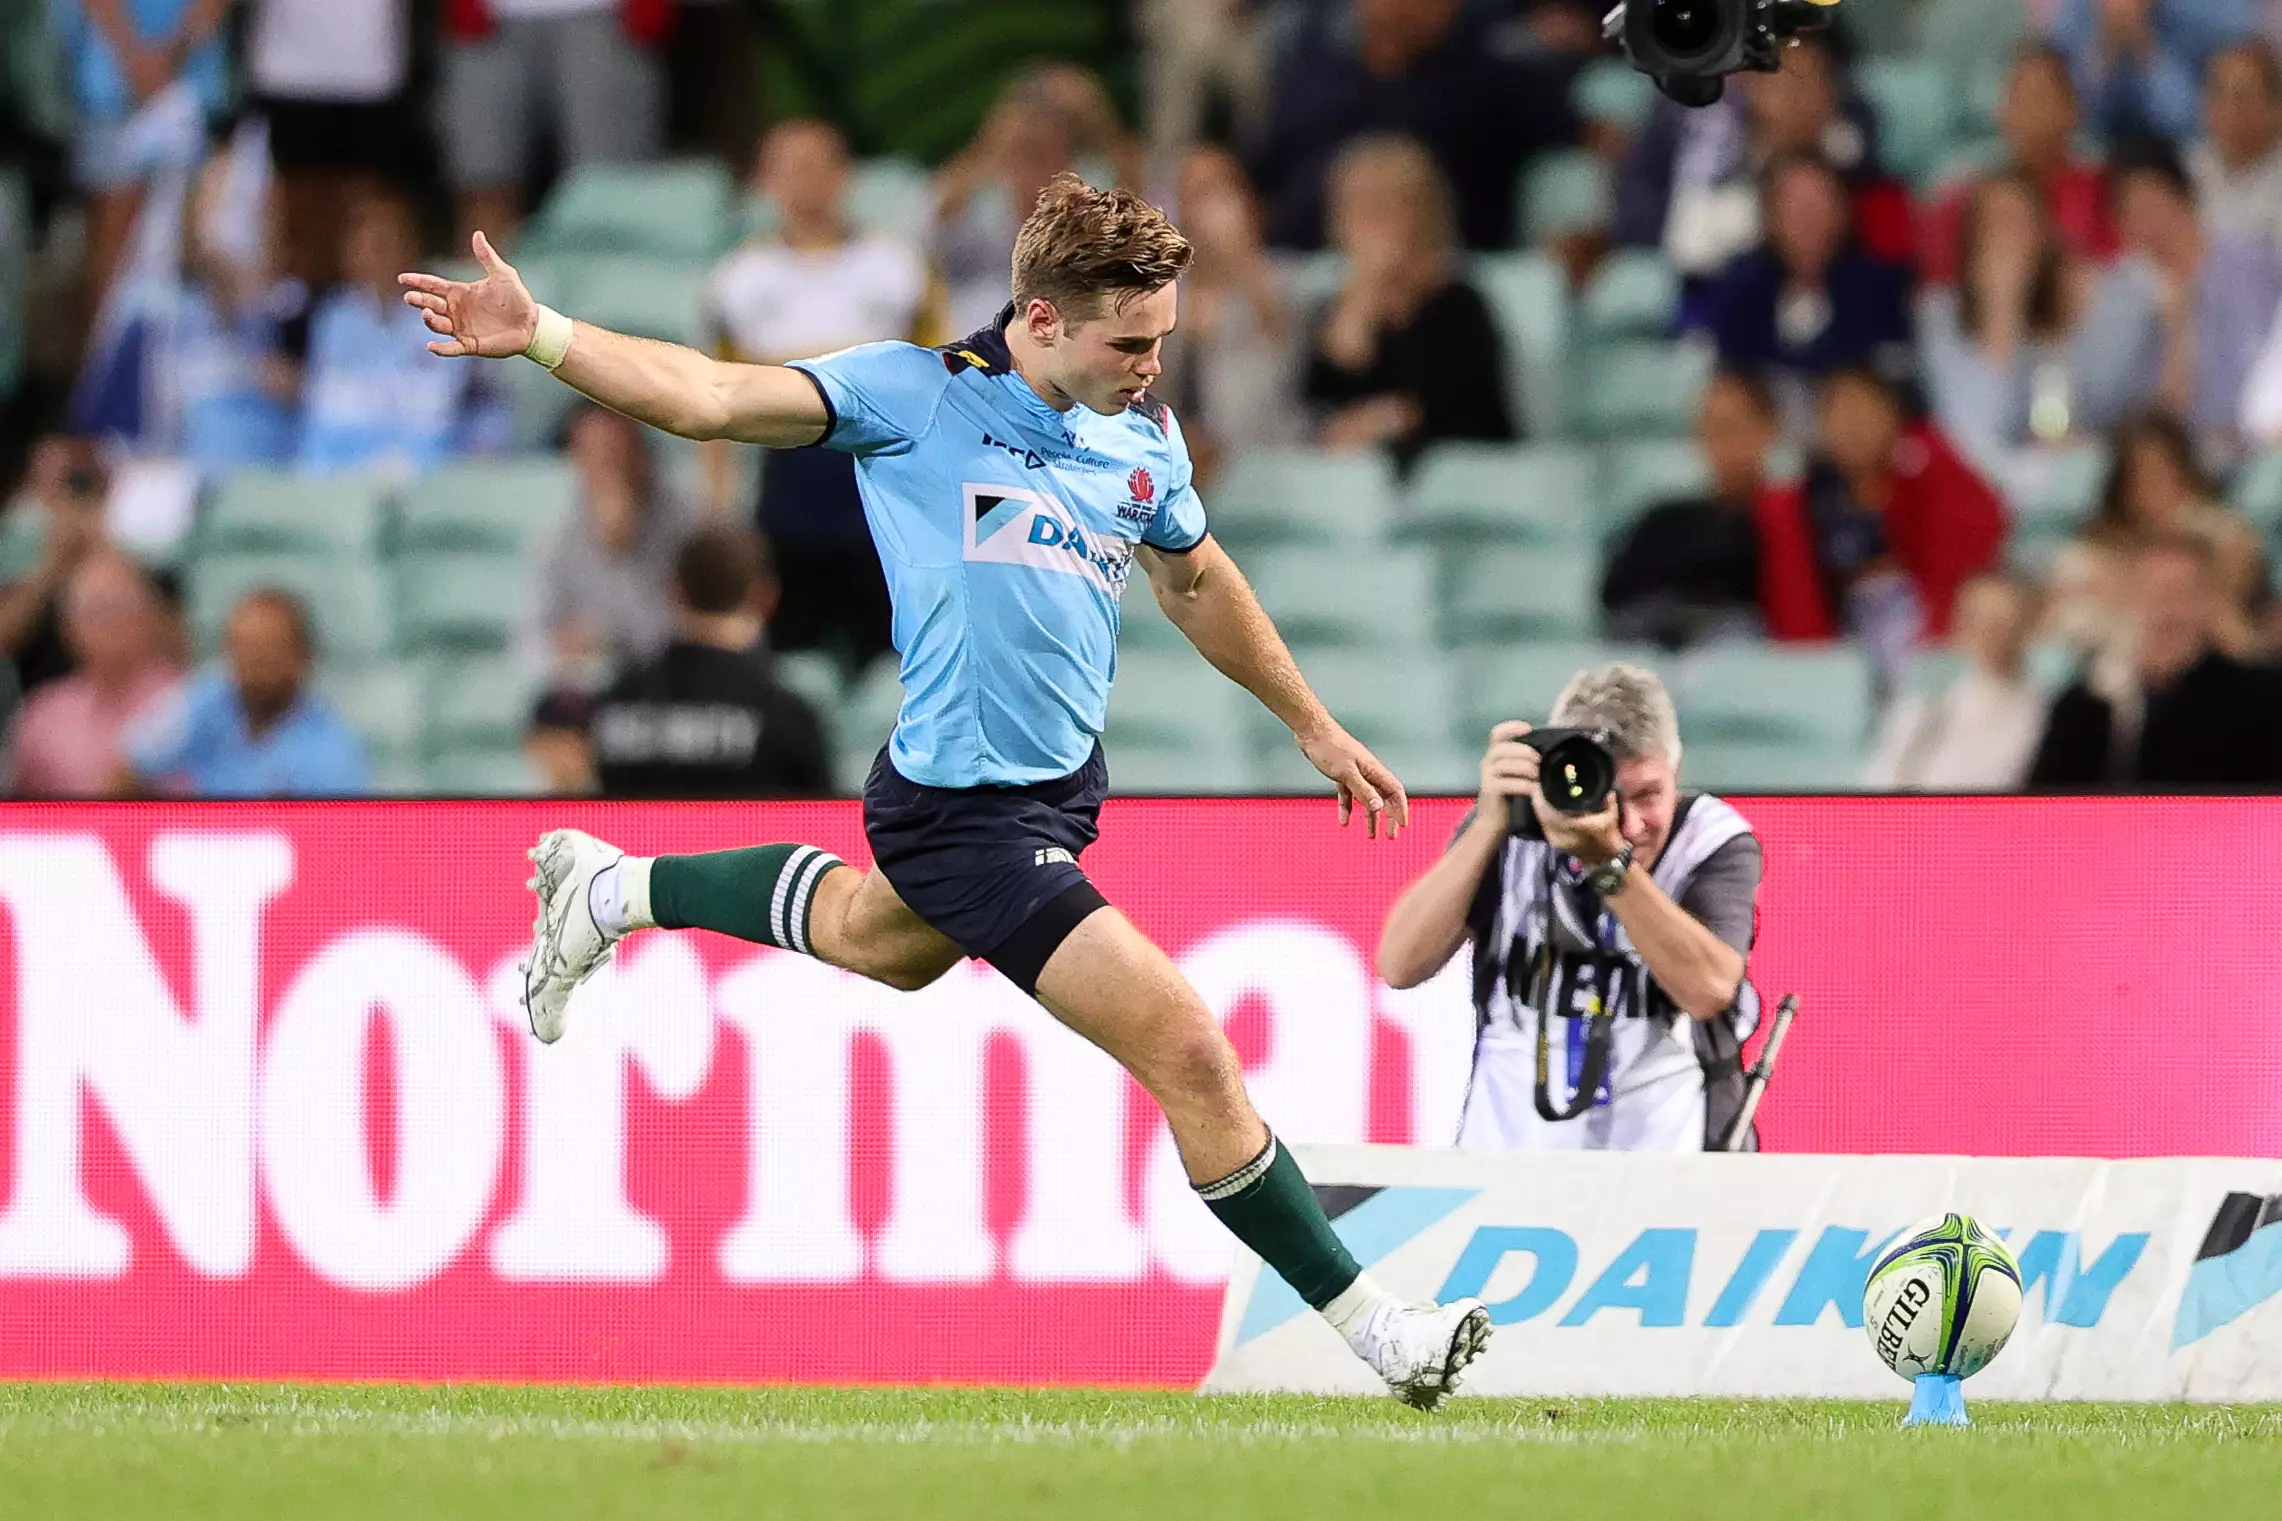 Will Harrison has been a standout performer for the Tahs.